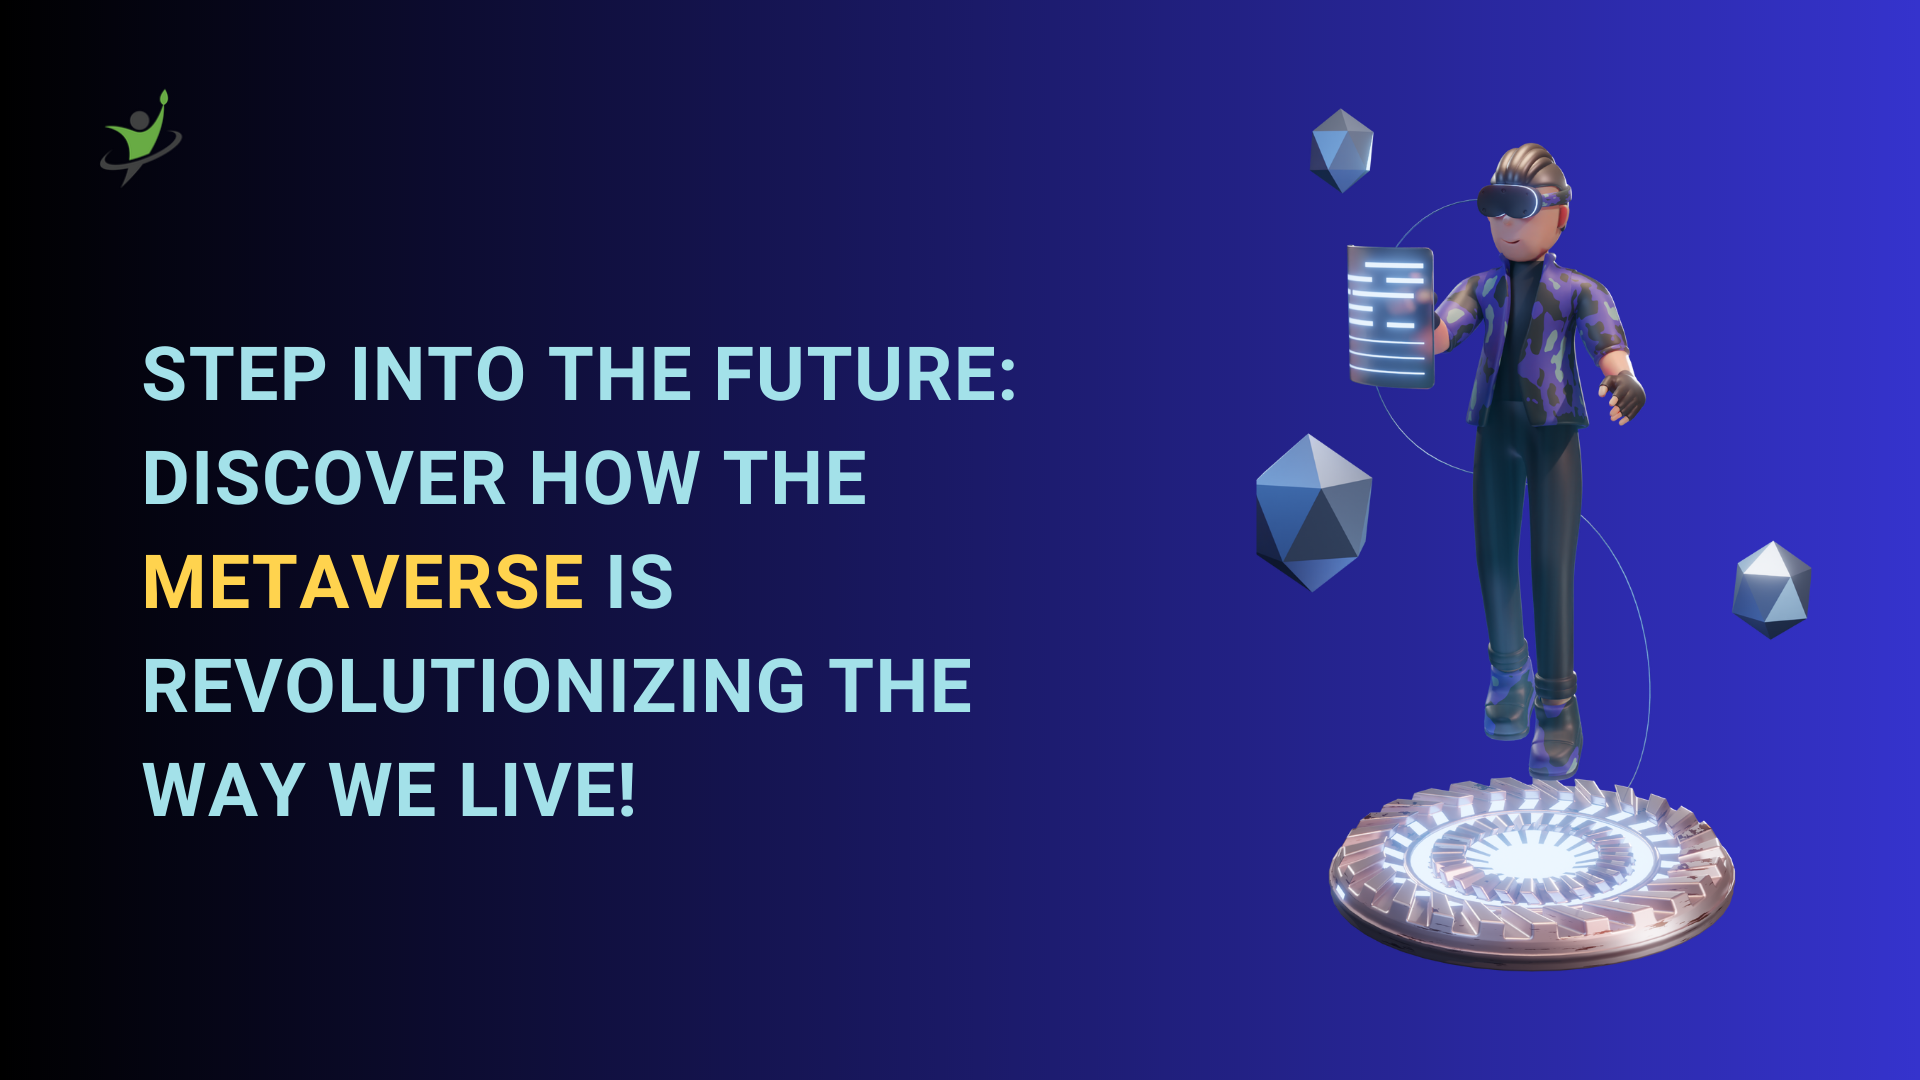 Metaverse is Revolutionizing the Way We Live!